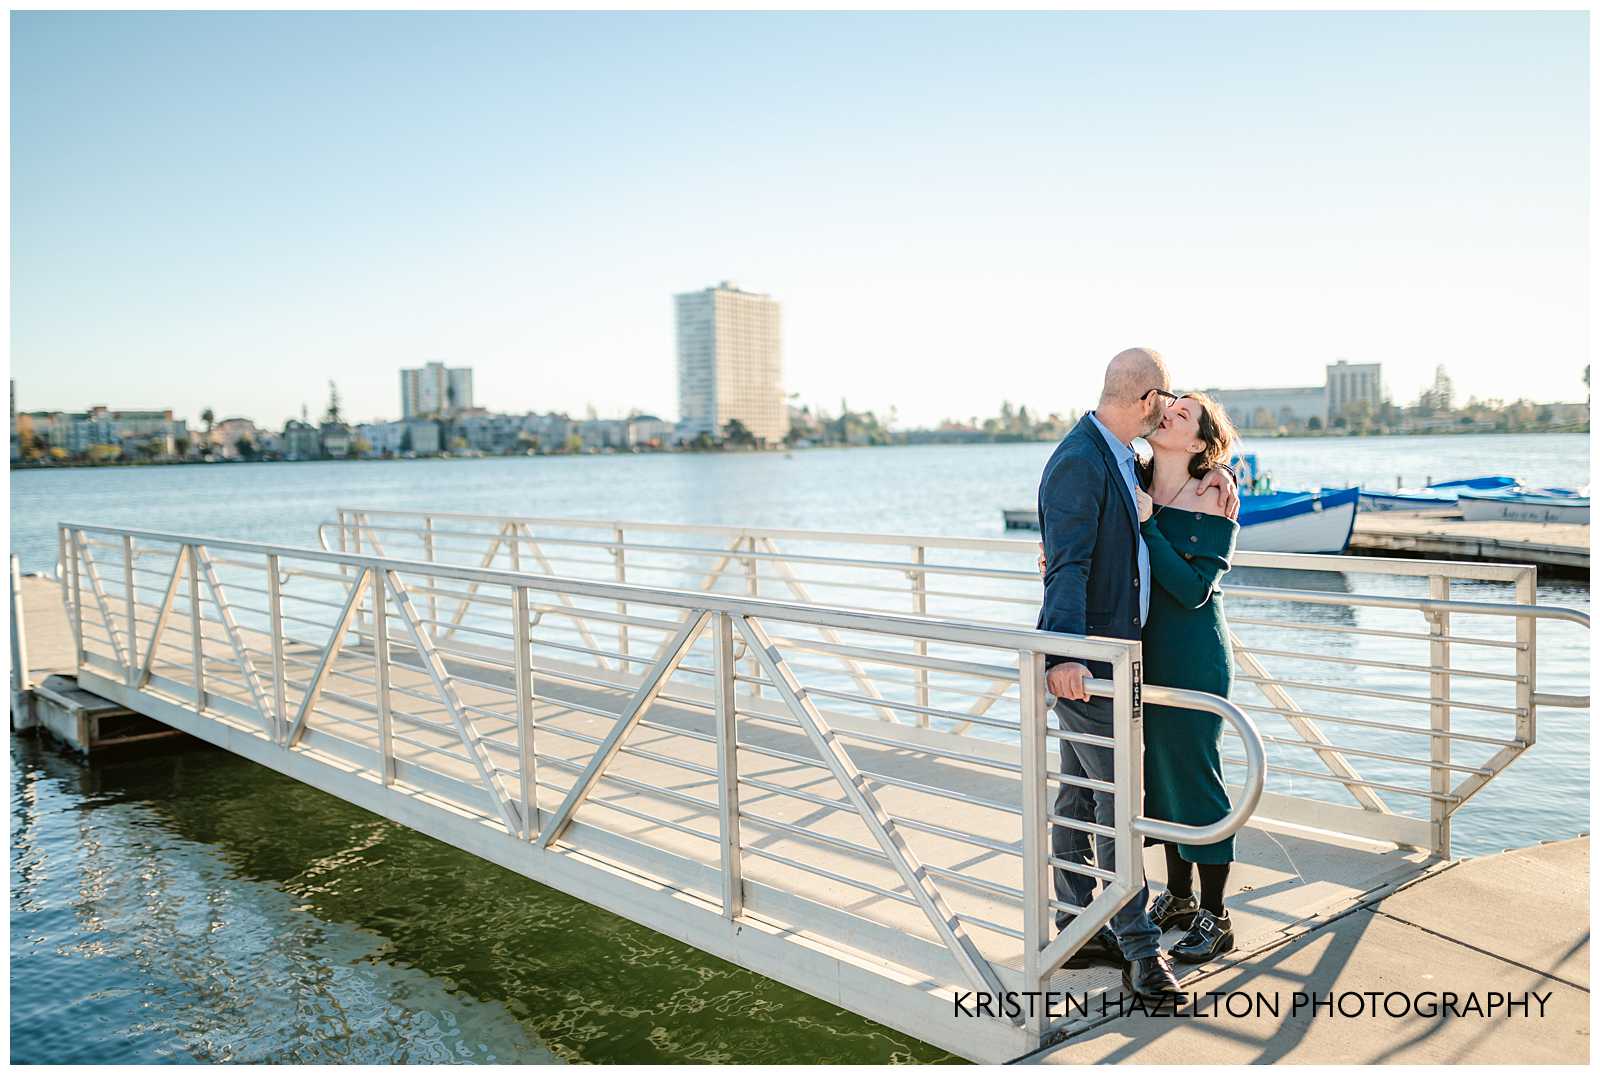 Man and woman kissing on a dock at Lake Merritt in Oakland California